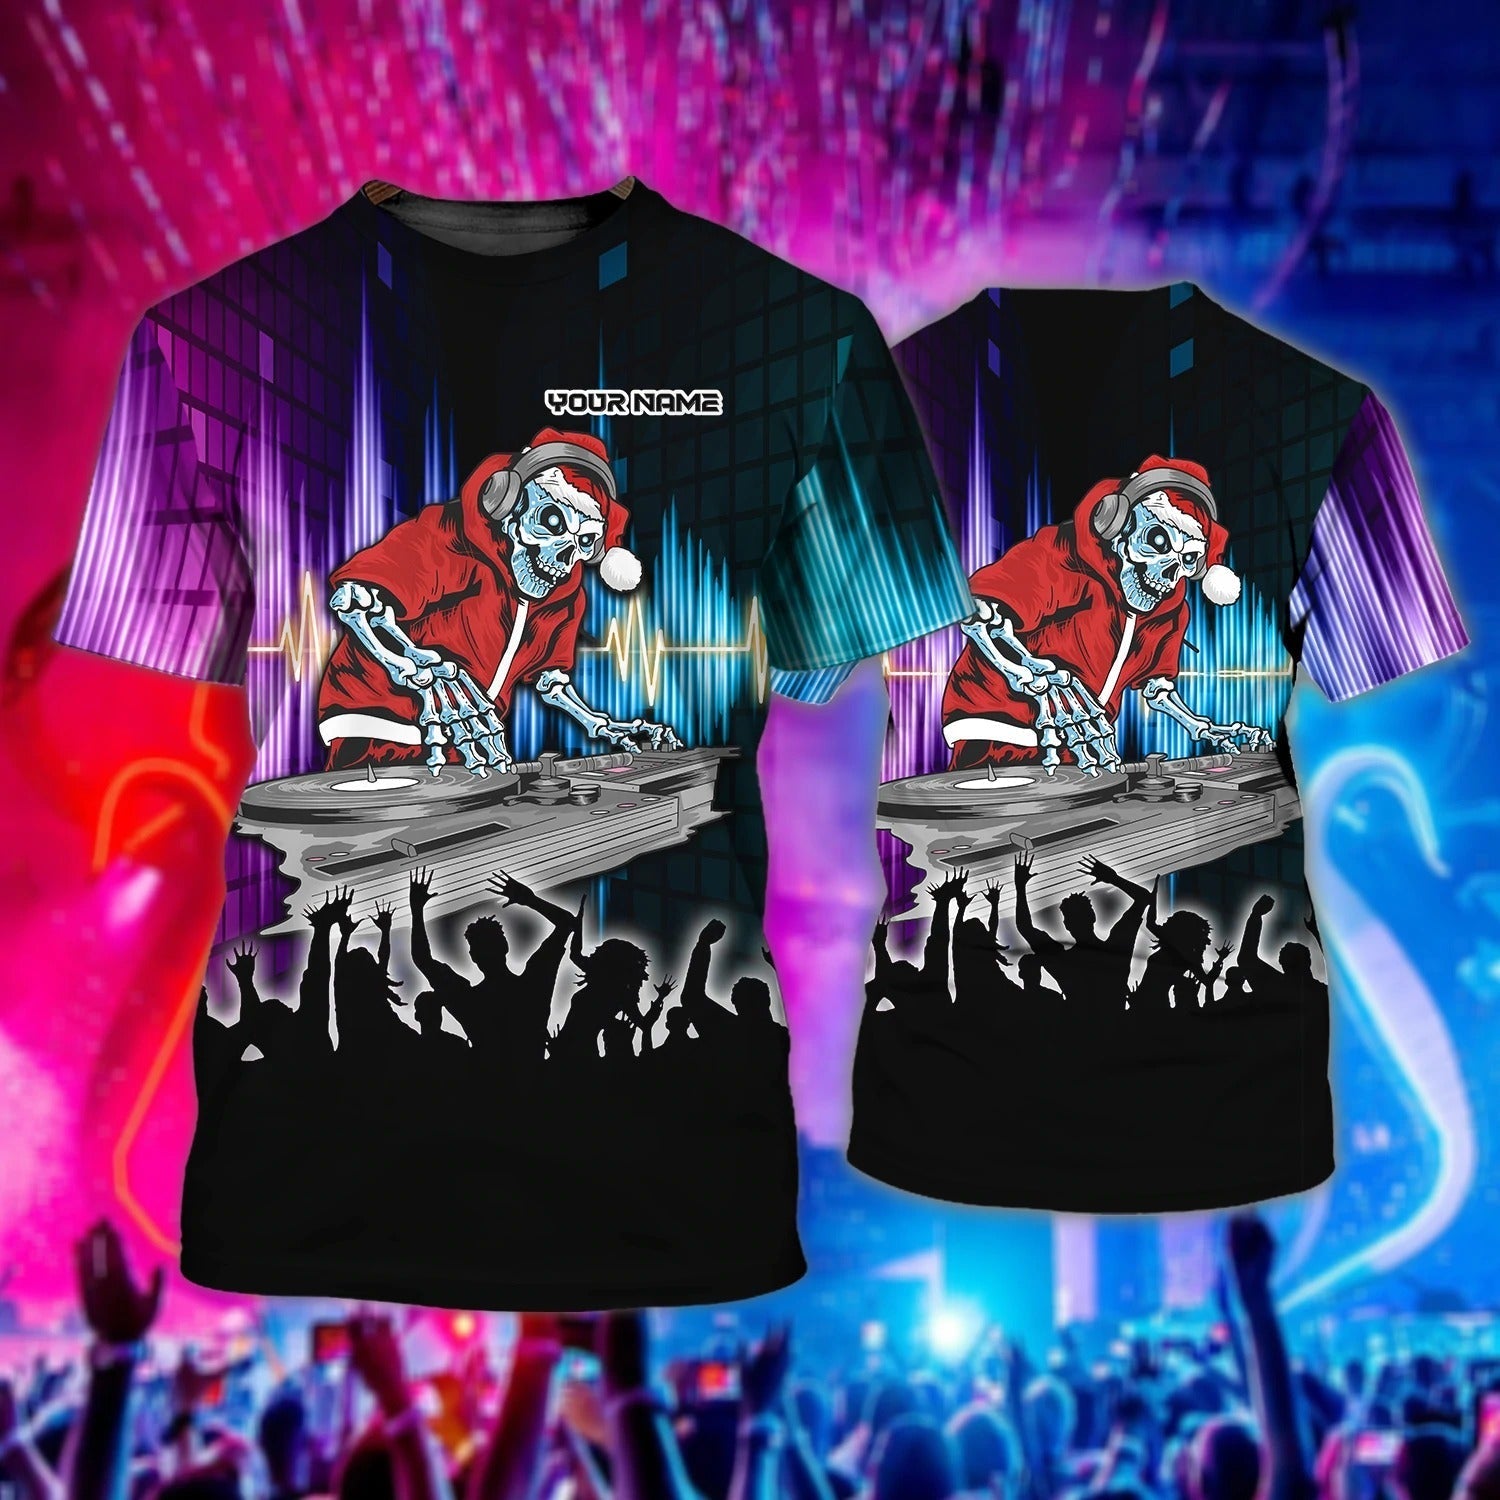 Personalized 3D Full Print T Shirt For Dj And Musican/ This Dj Is Taking Requests Shirts/ Dj Shirt